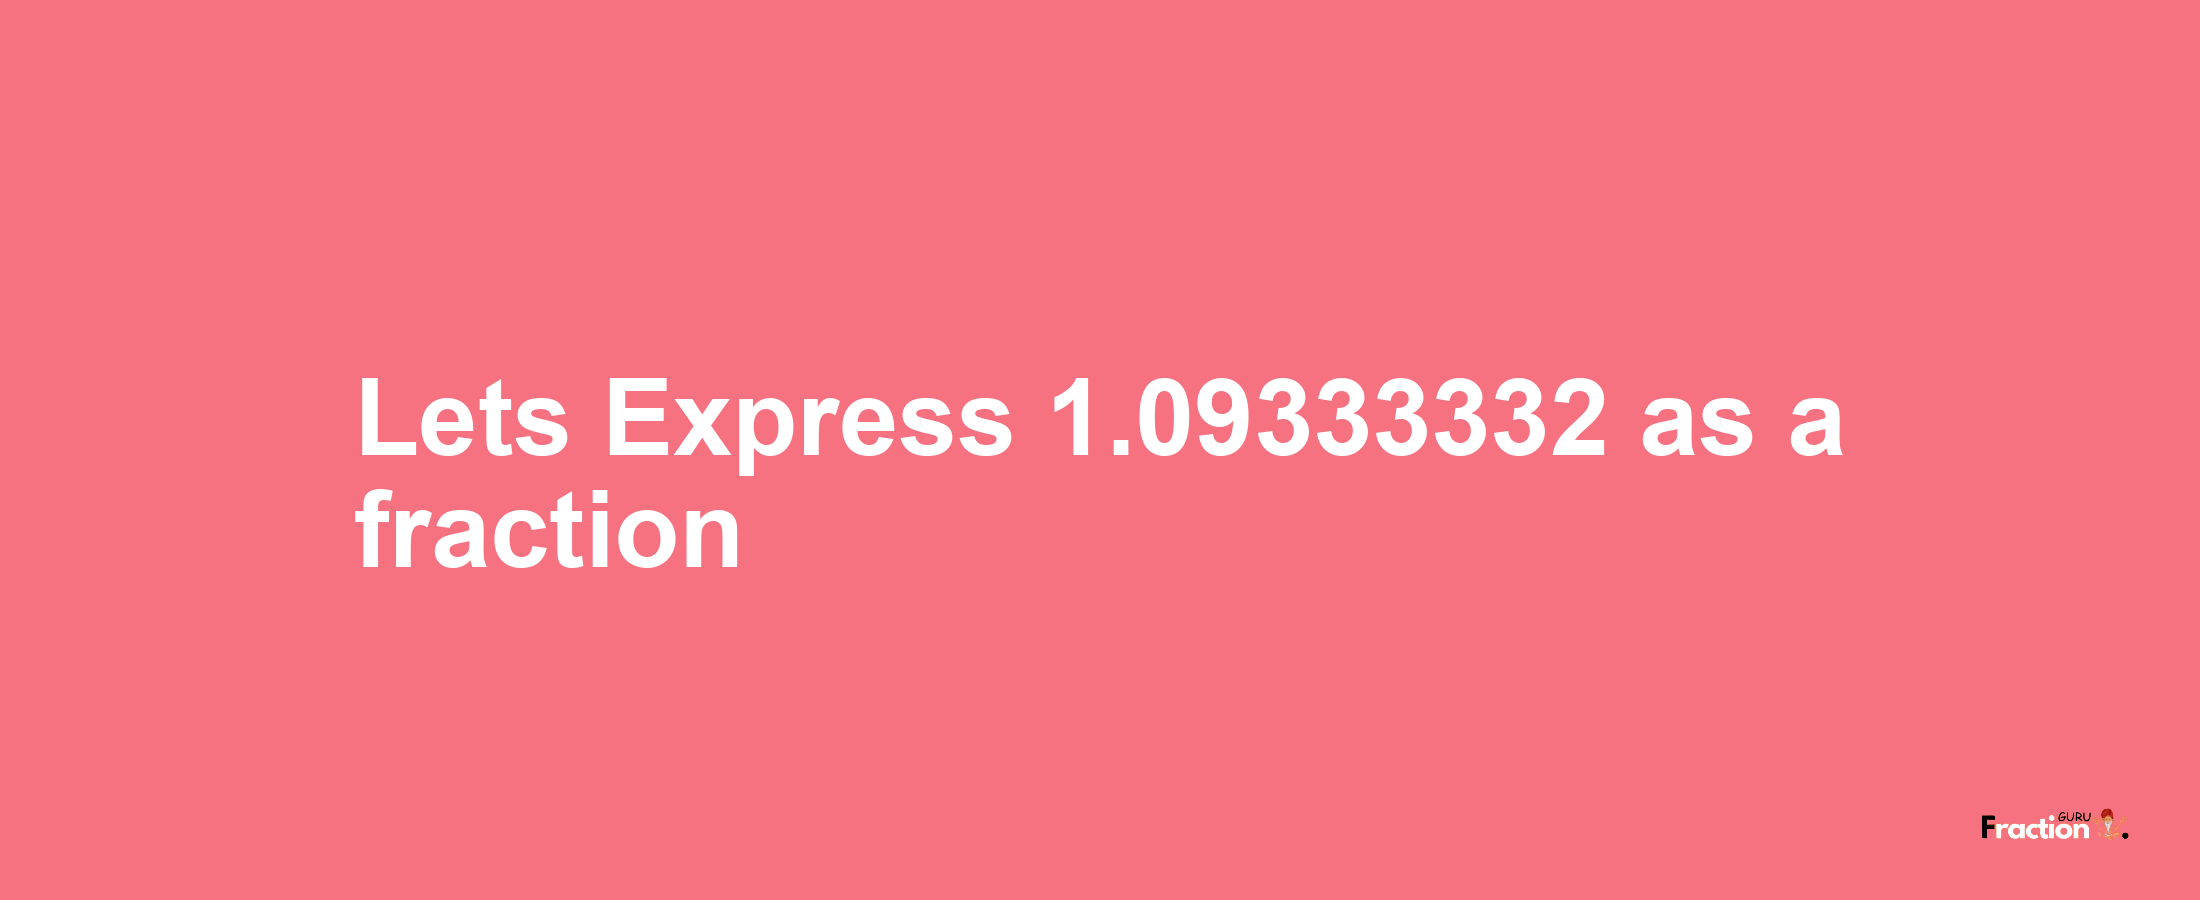 Lets Express 1.09333332 as afraction